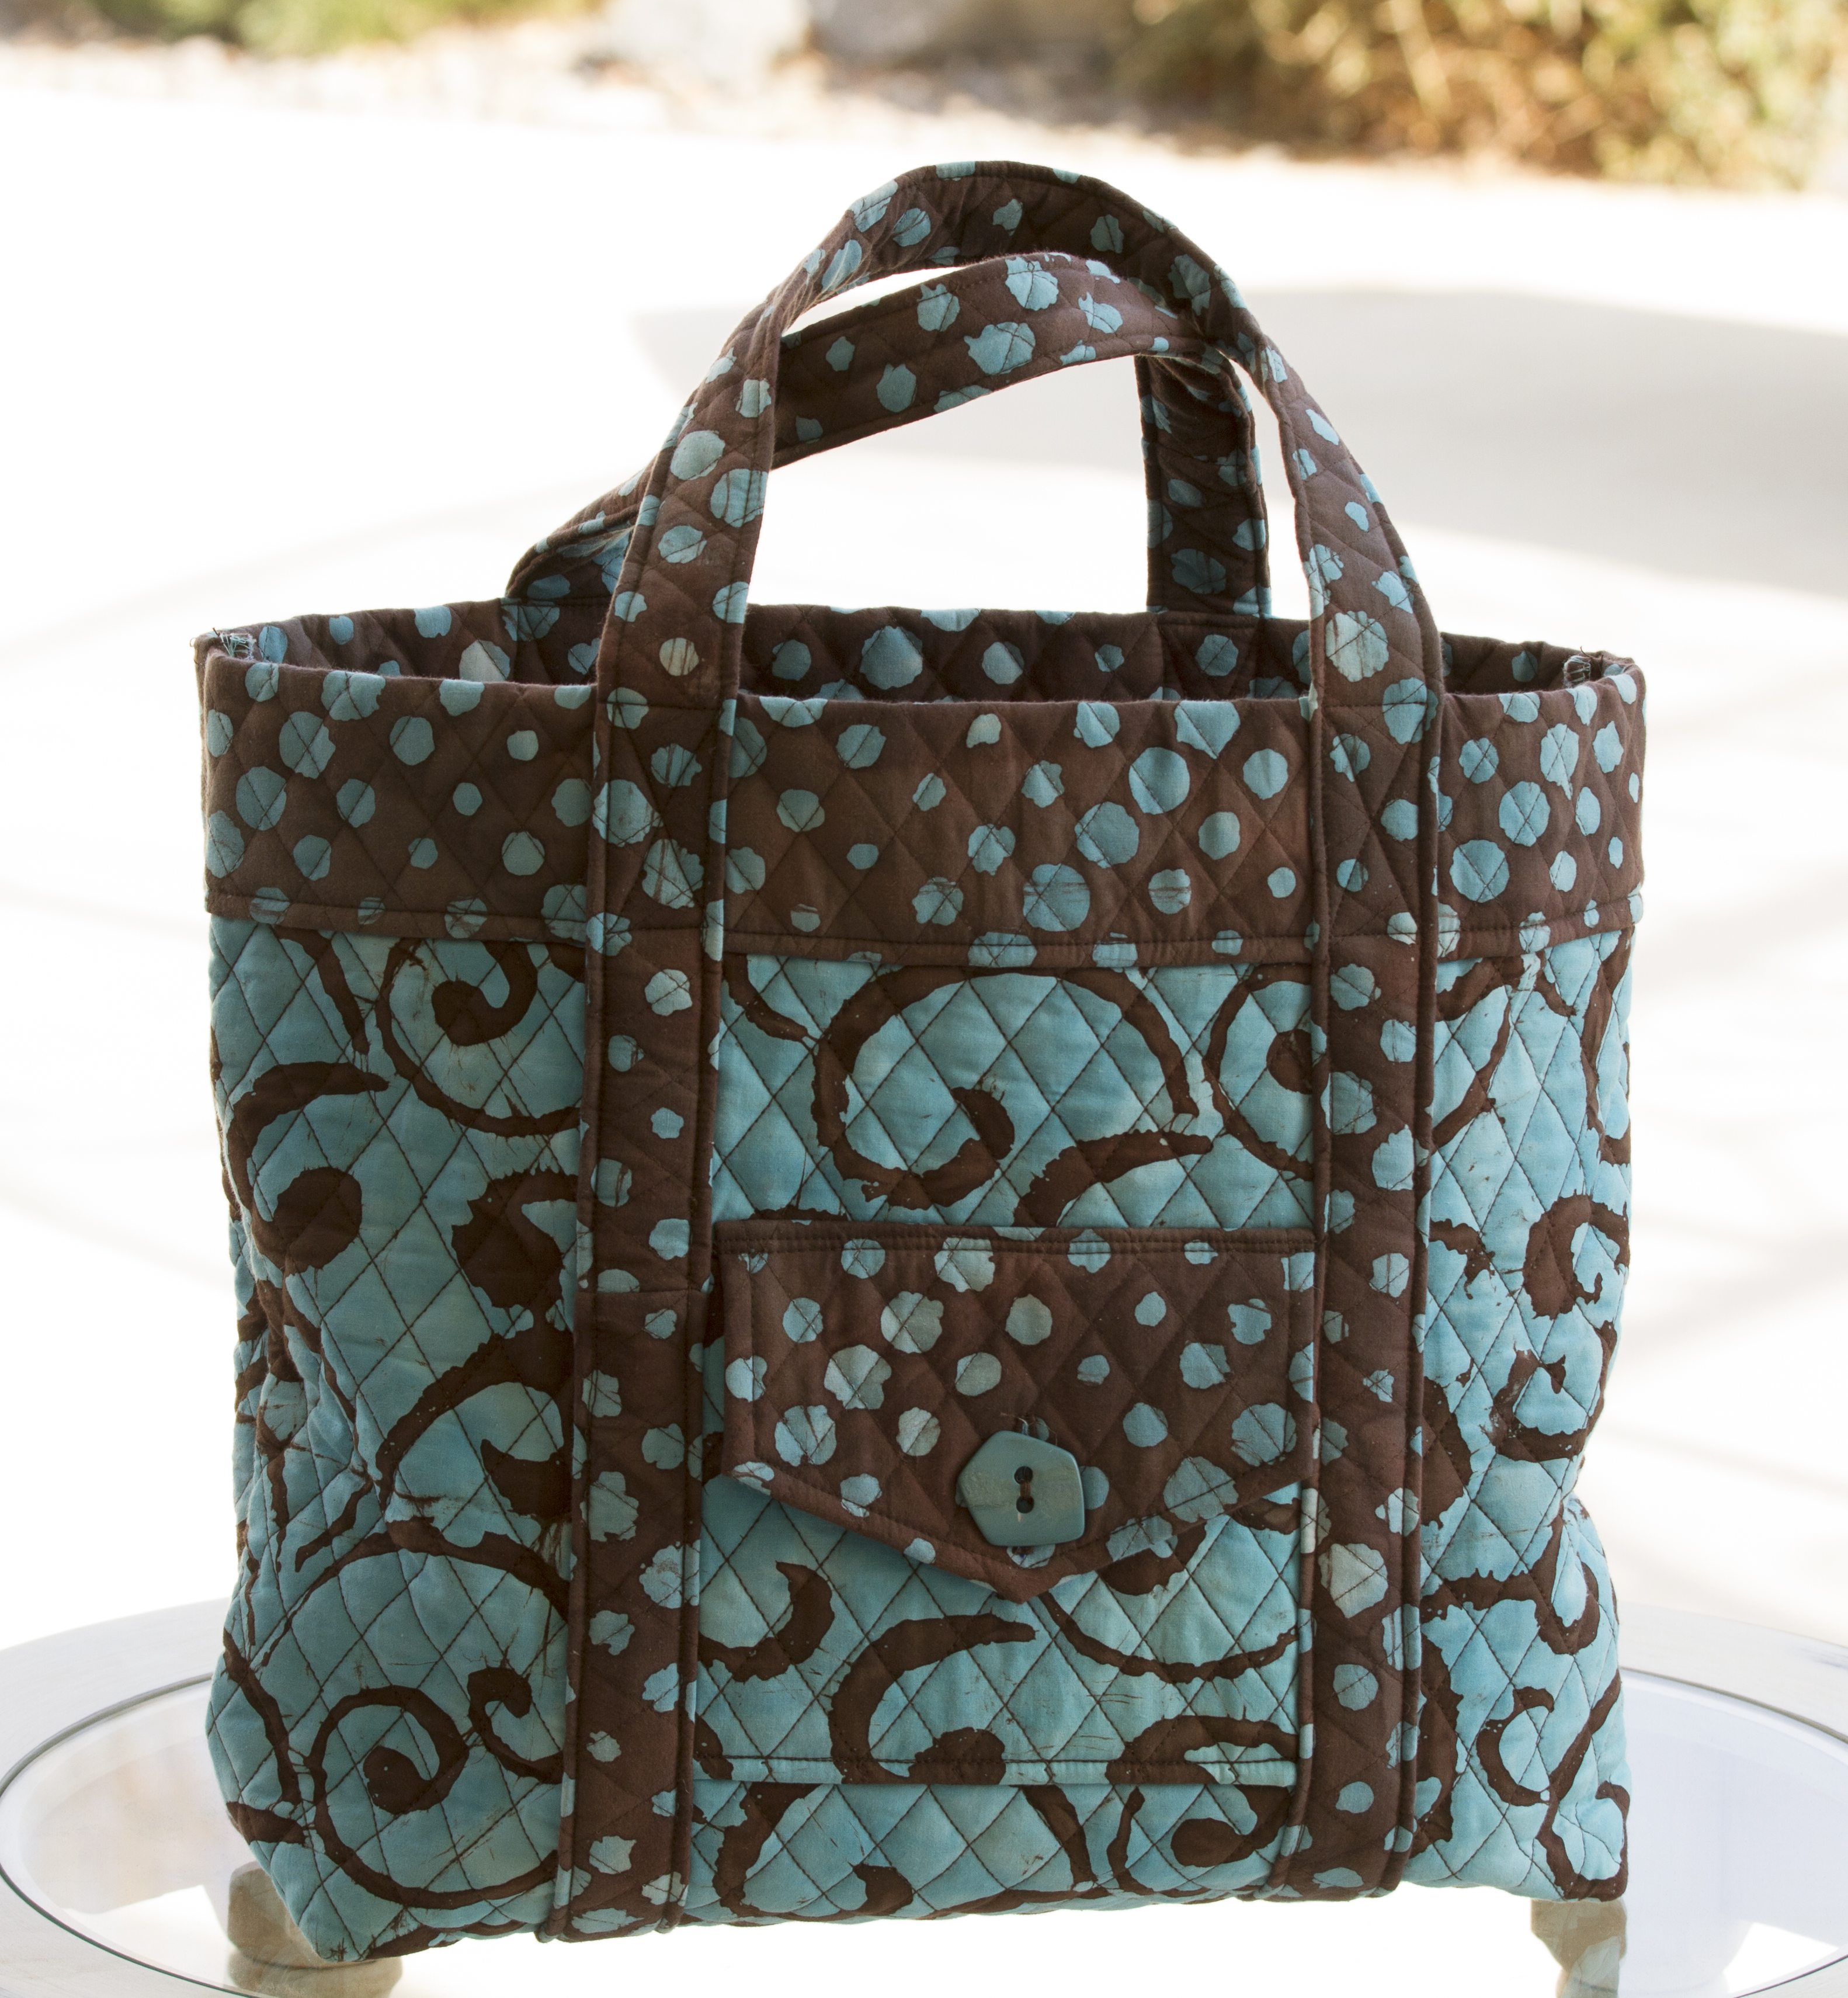 Tote bag sewn with quilted fabric. http:.lifeatthecottage